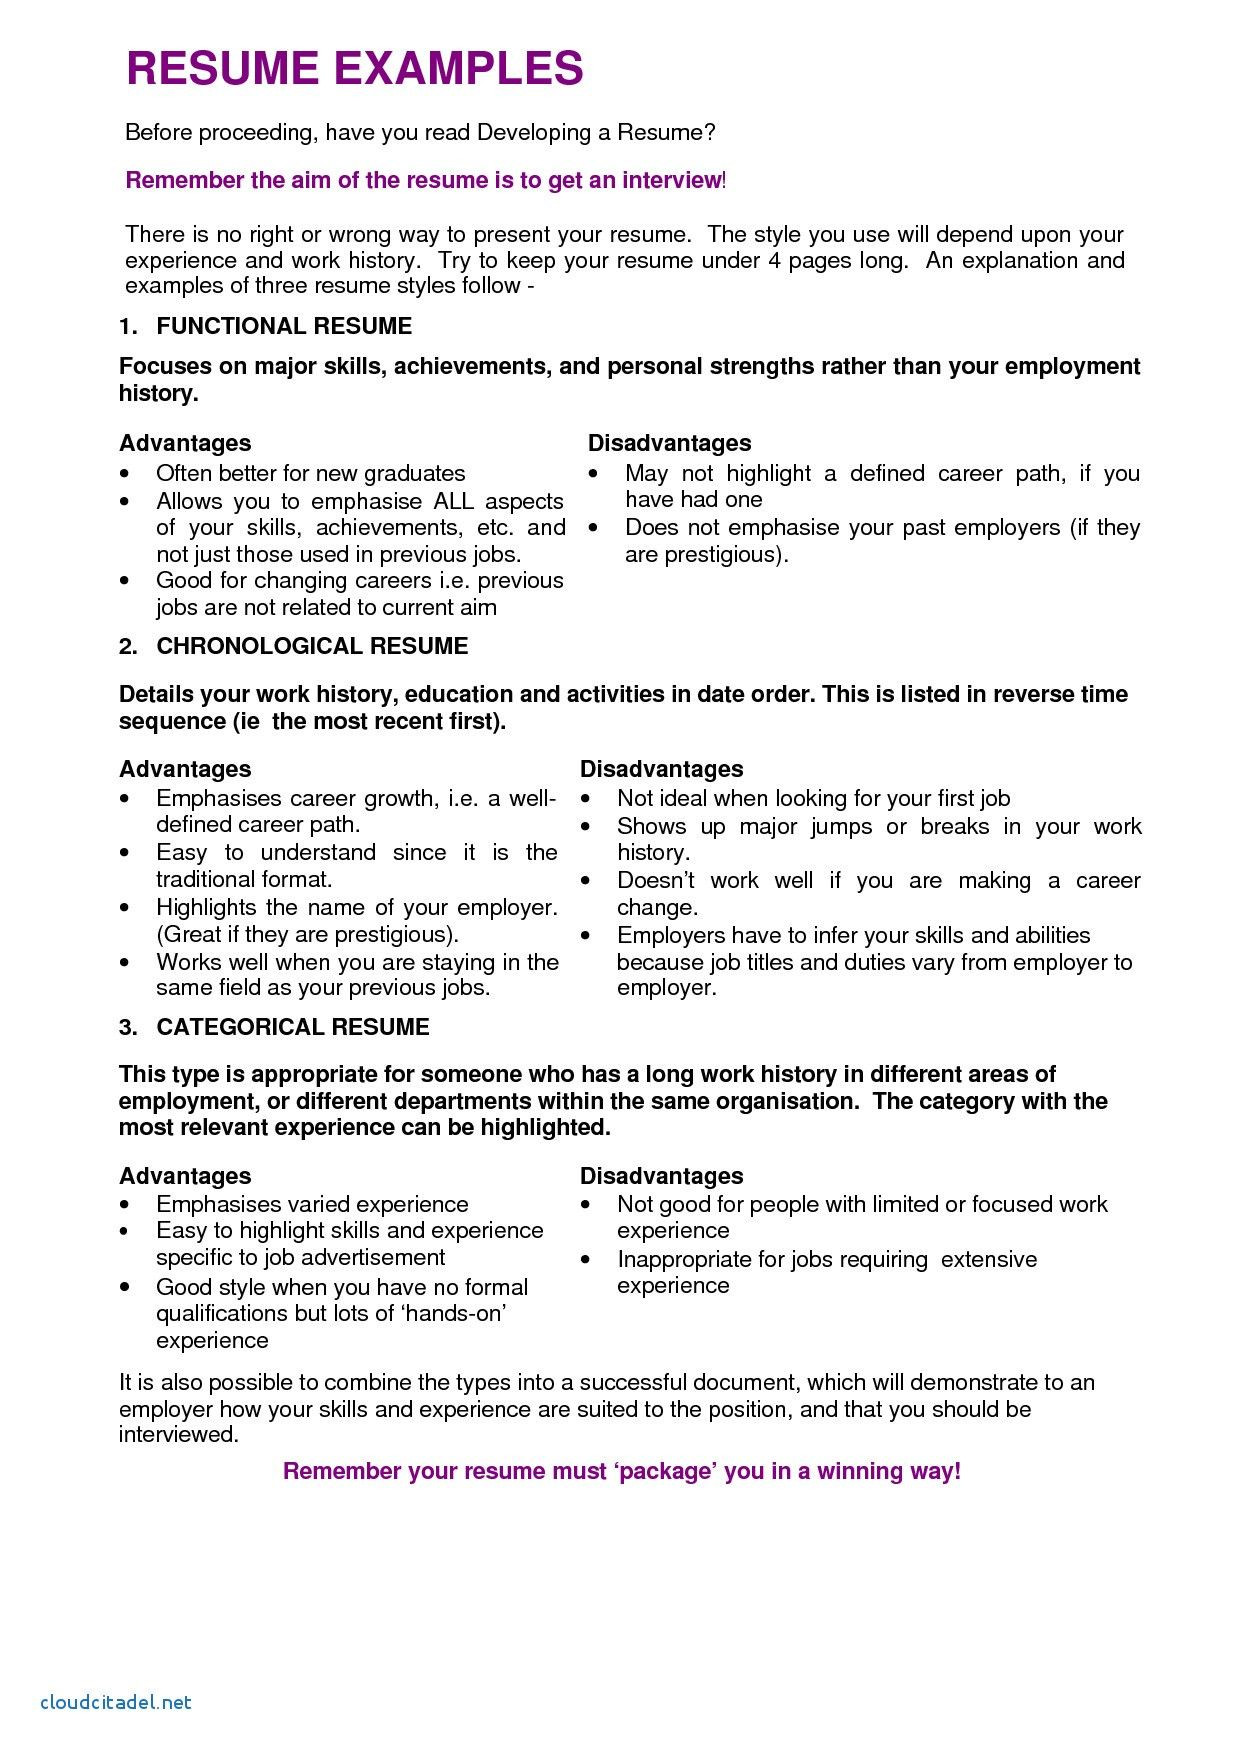 Sample Resume with Diverse Work Experience Resume Examples Varied Experience – Resume Templates Resume …